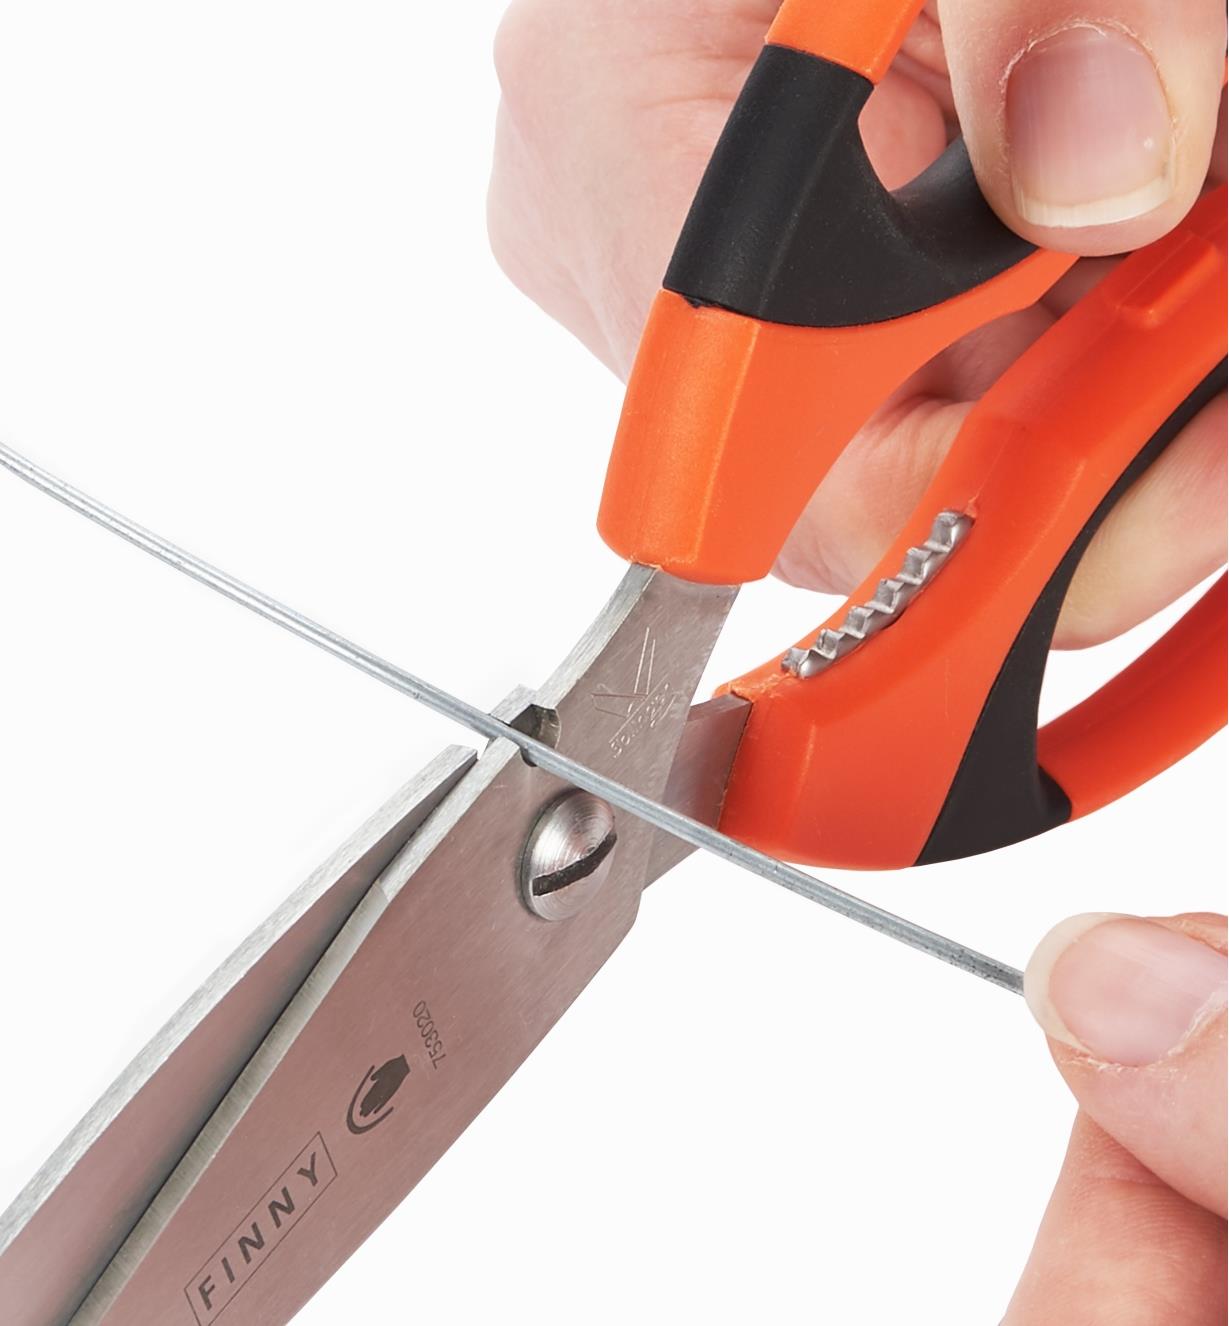 Cutting wire with the built-in wire cutter on the back of the scissors blade